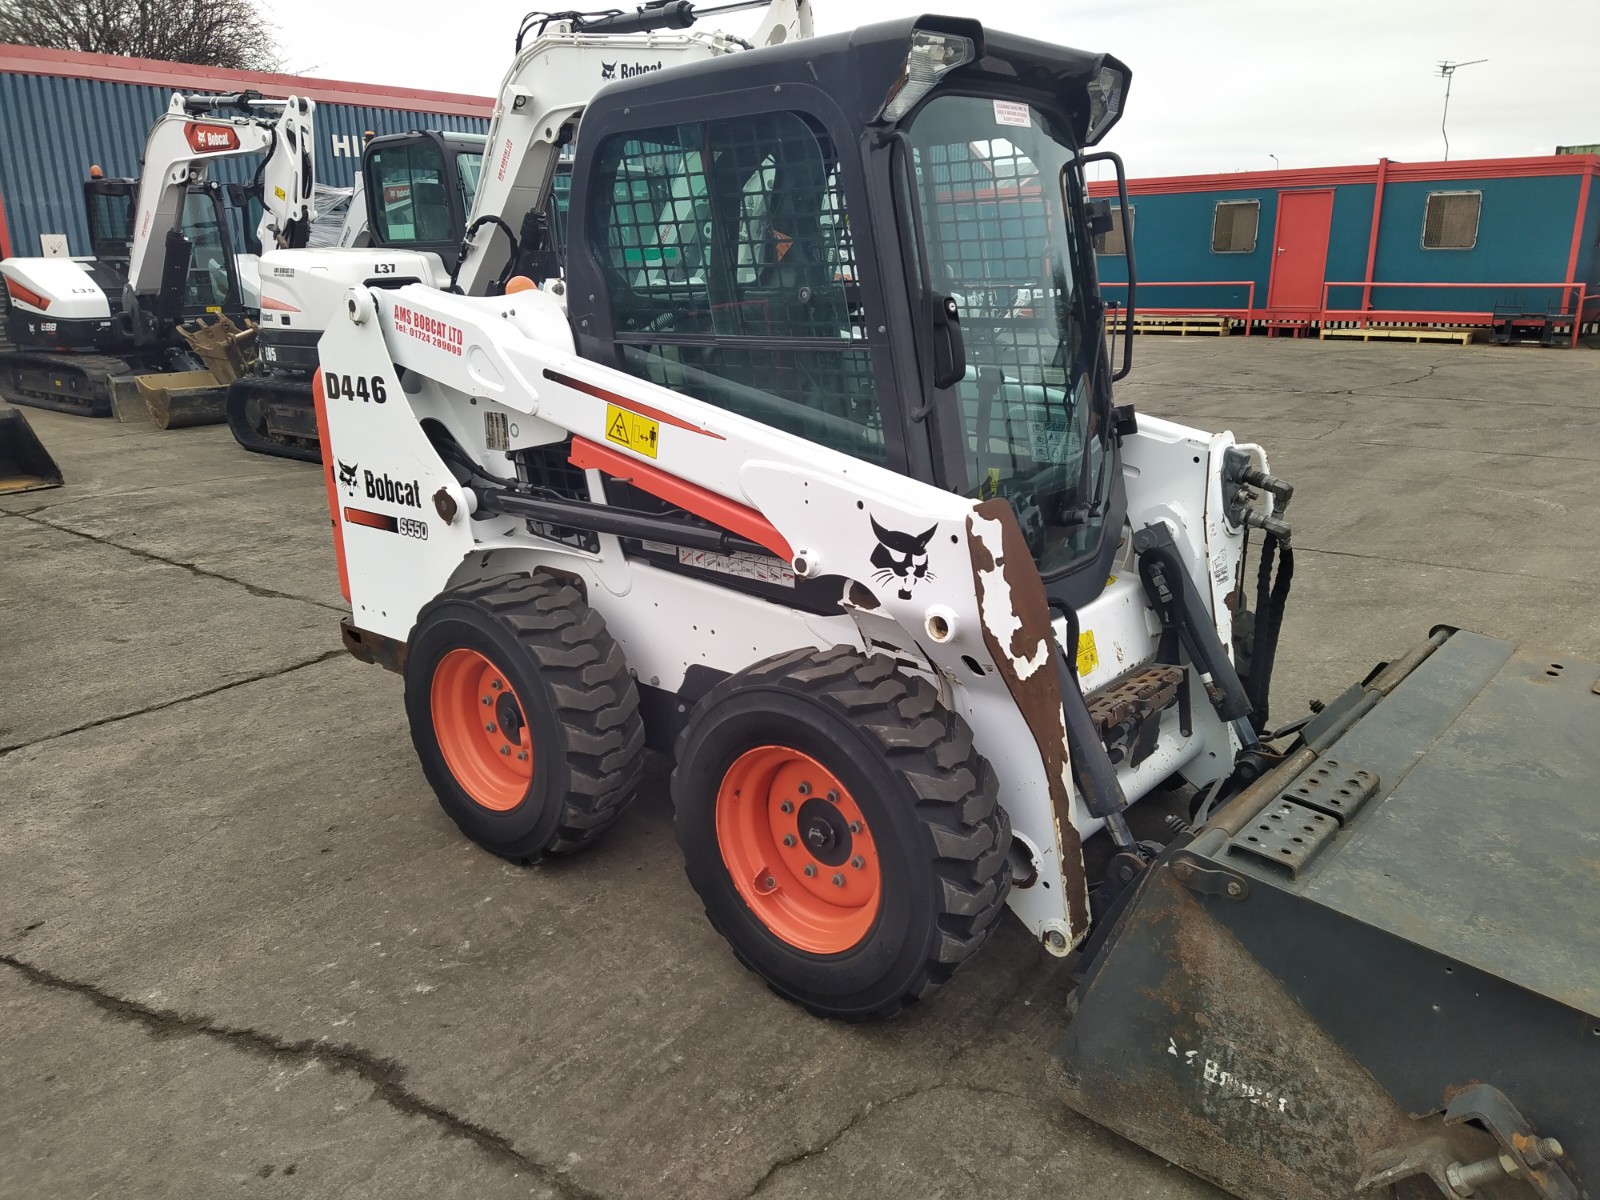 Used Bobcat S550H at AMS Bobcat Ltd - 0800 998 1354 <small>(Free from most landlines)</small>